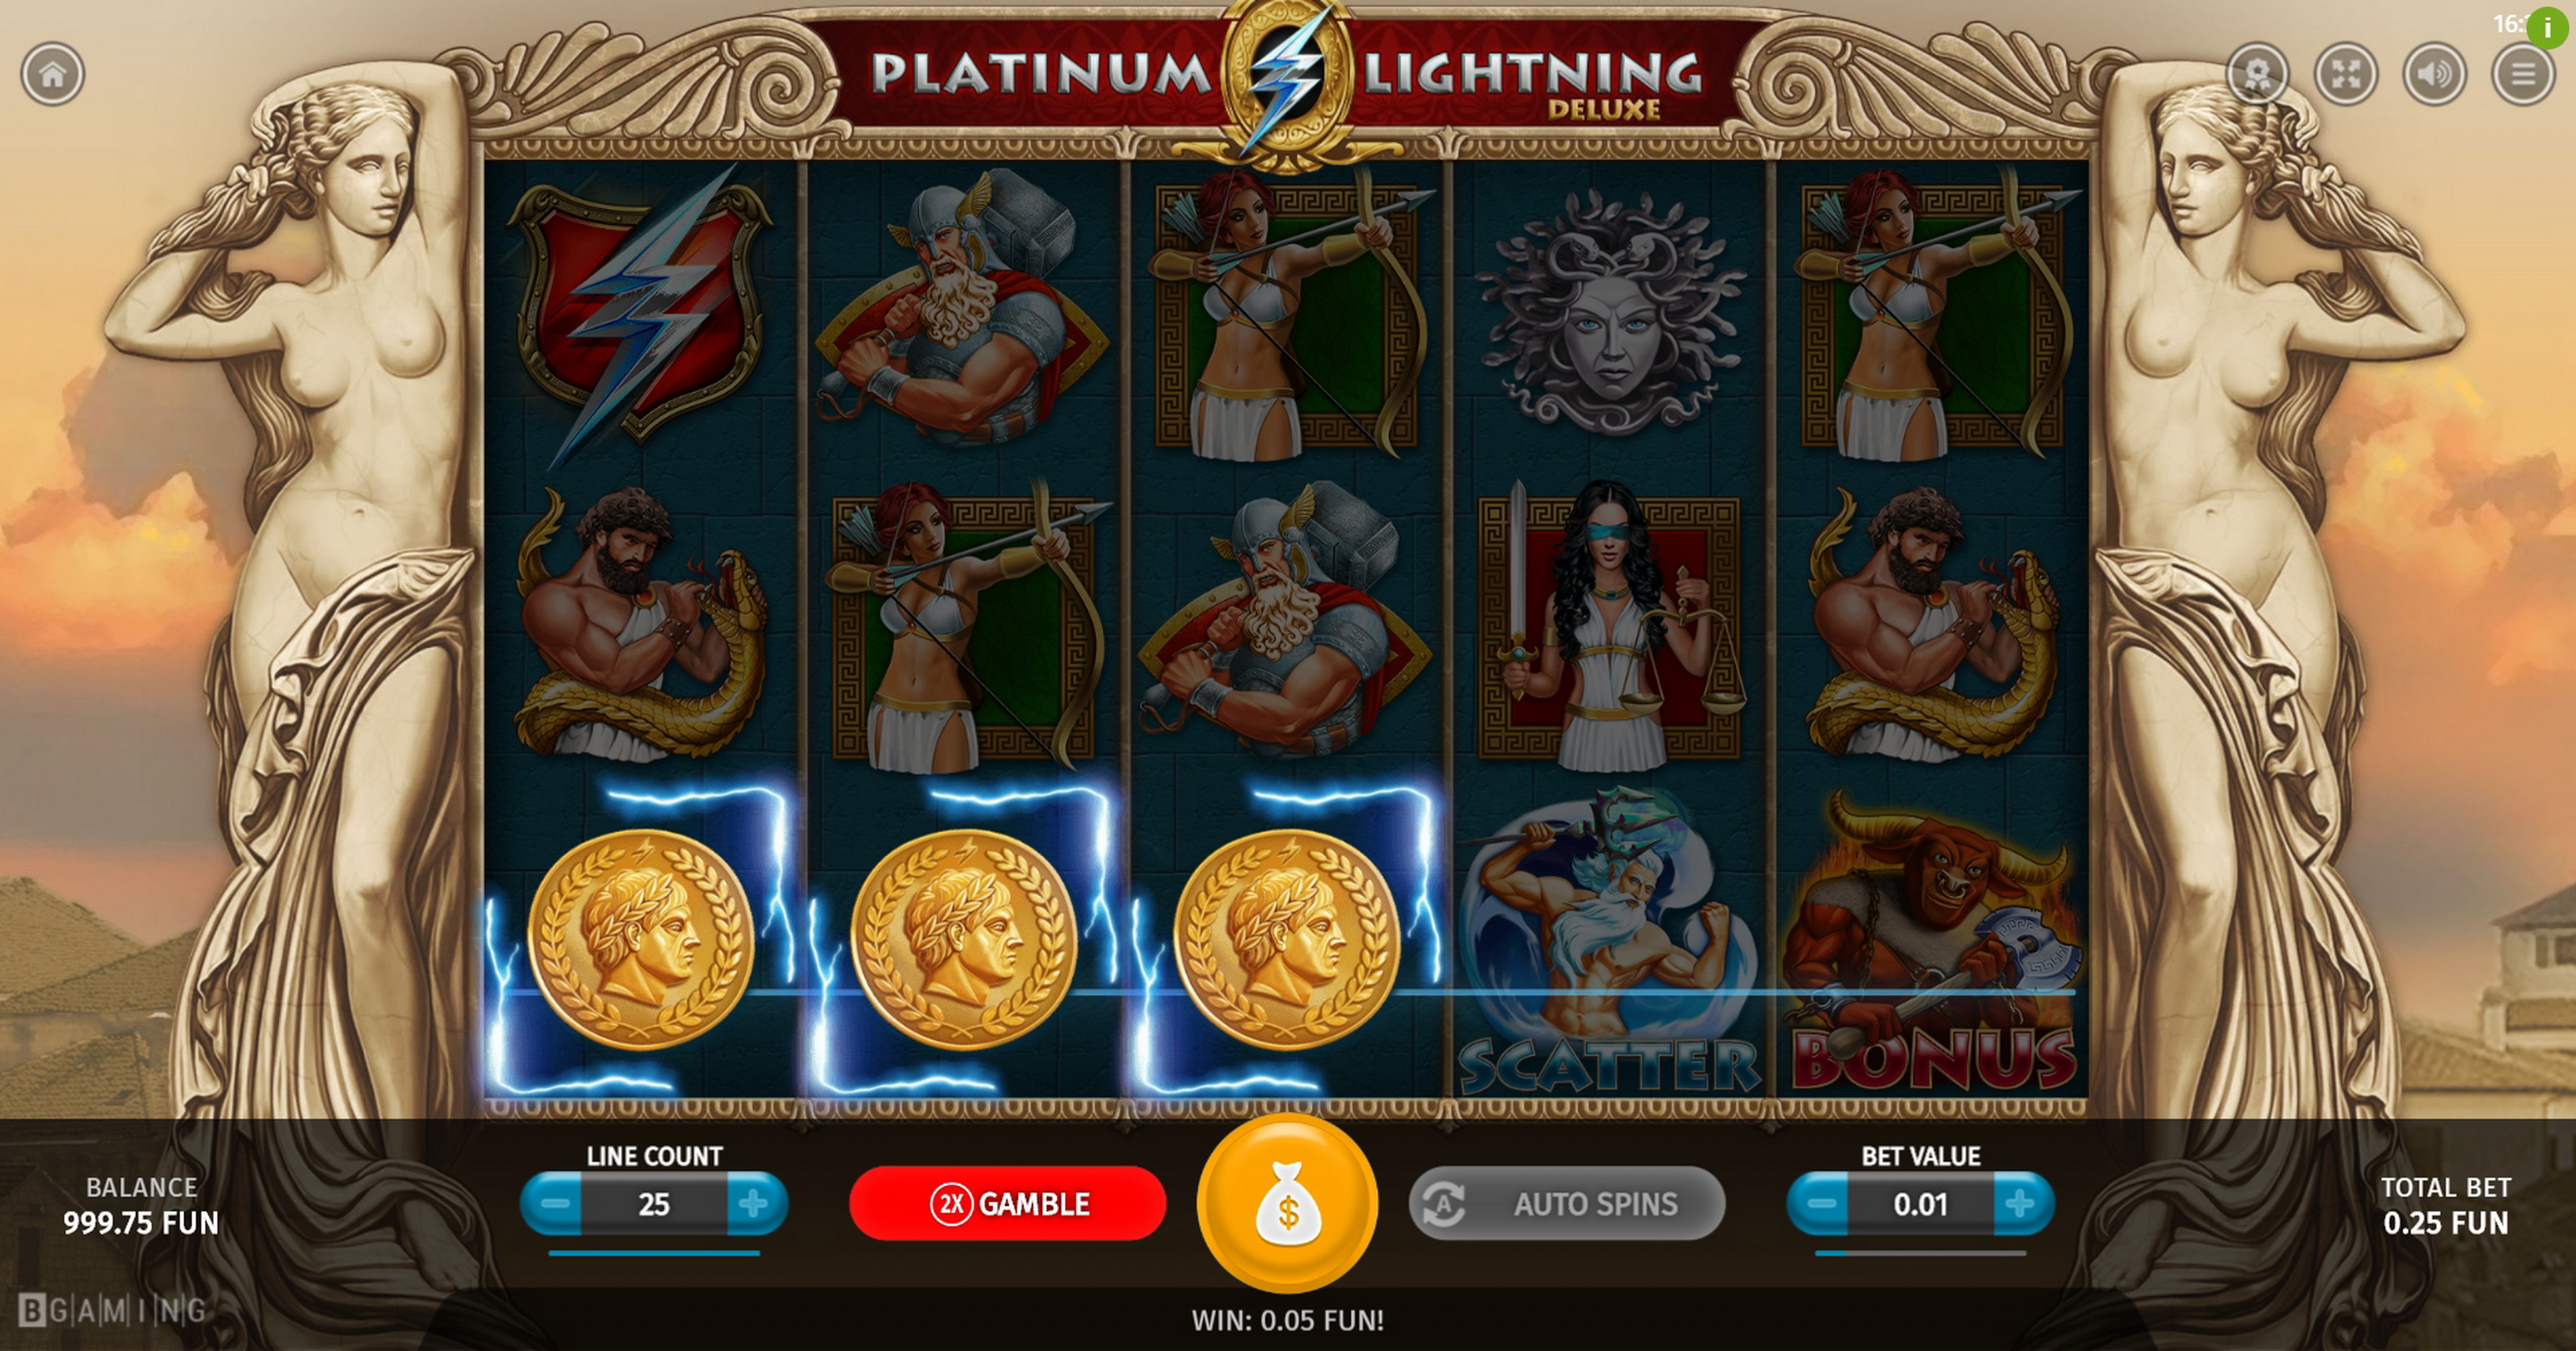 Win Money in Platinum Lightning Deluxe Free Slot Game by BGAMING